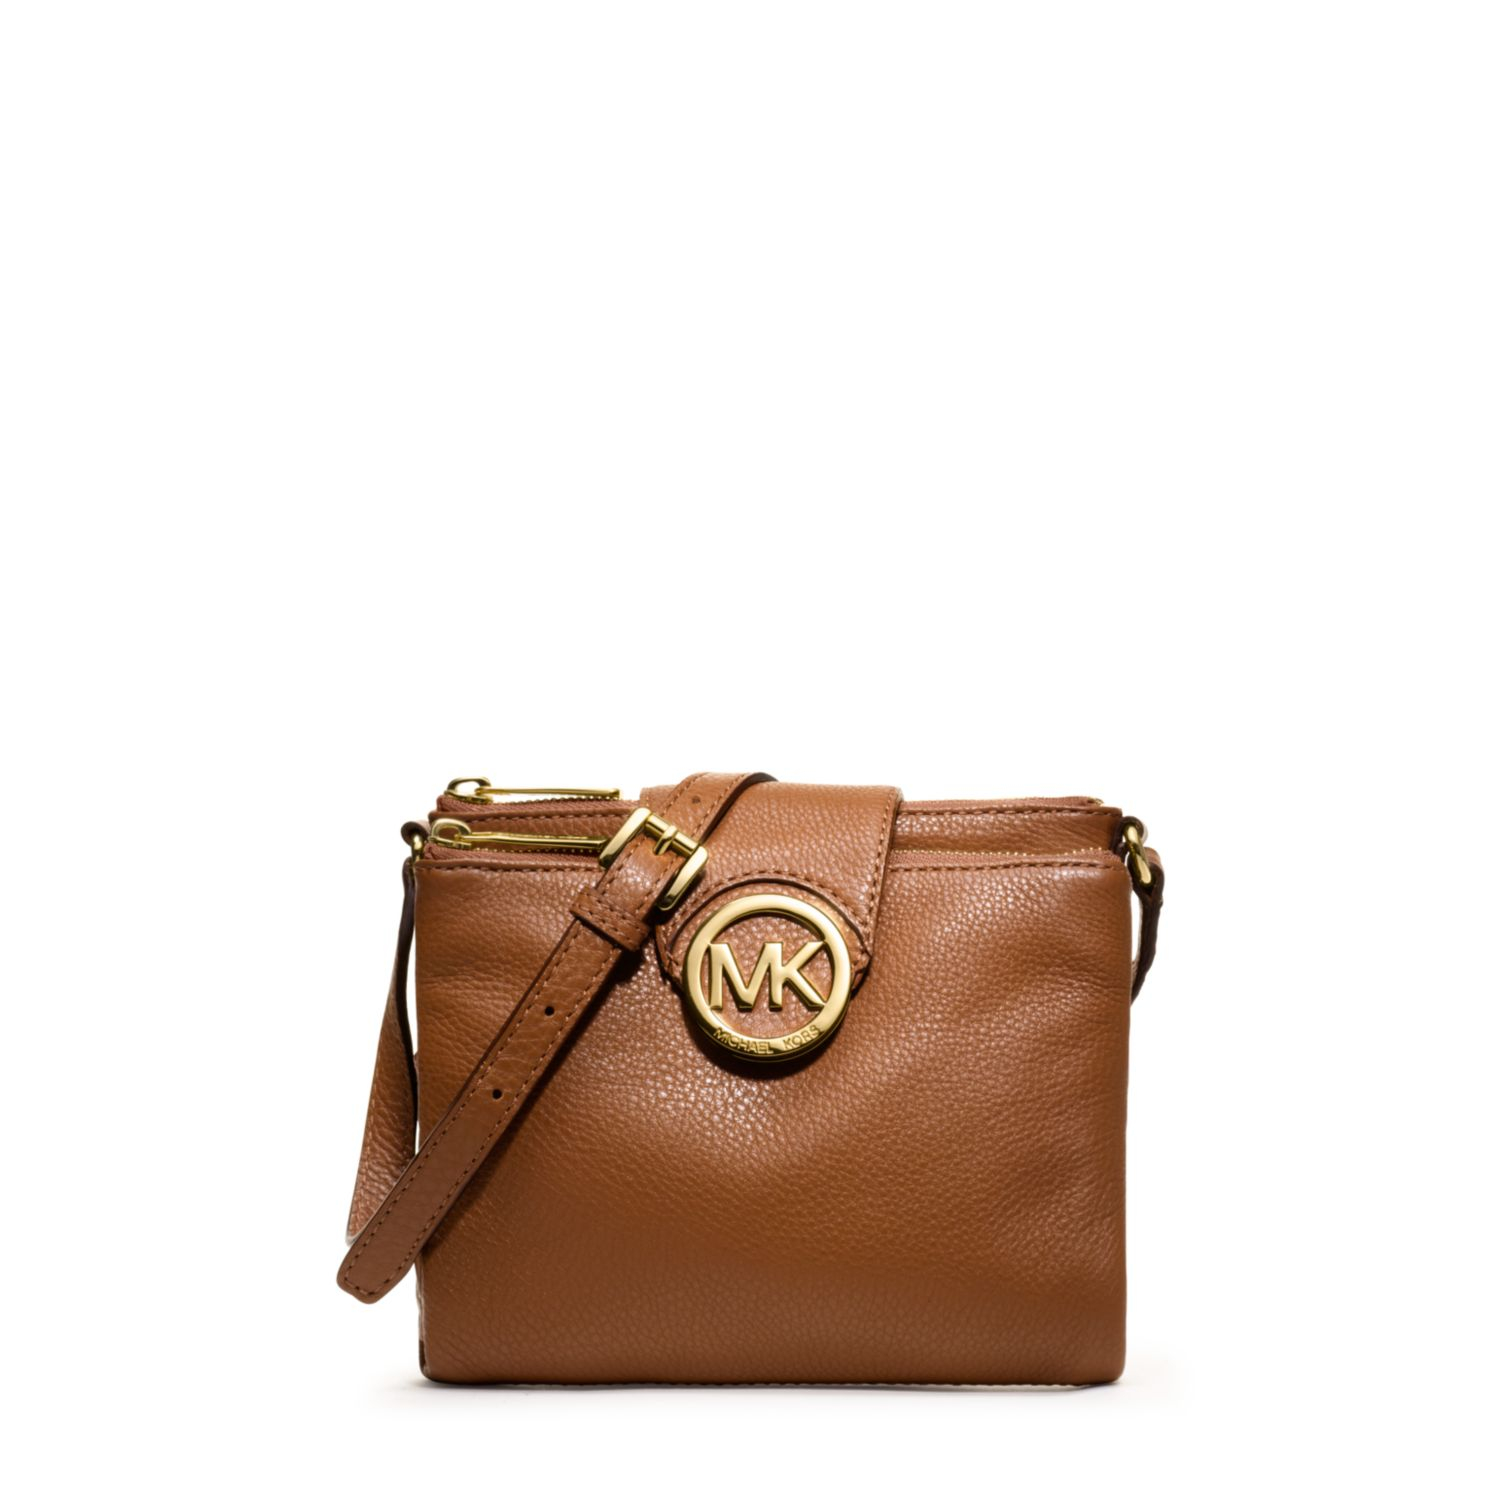 Michael Kors Fulton Large Leather Crossbody in Brown (LUGGAGE)